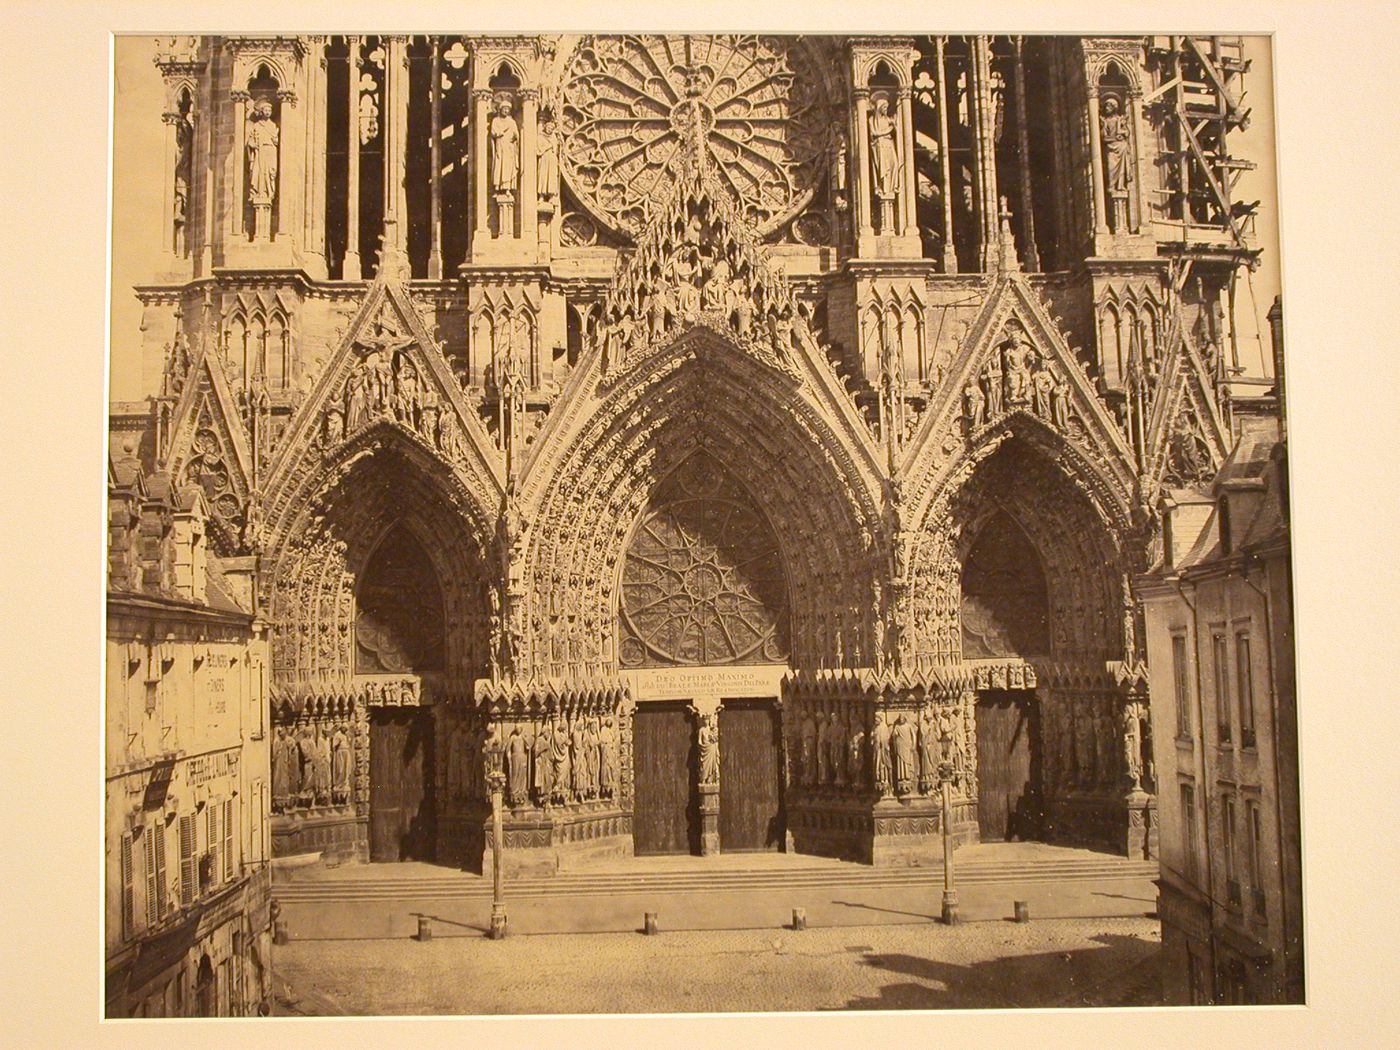 View of west façade excluding towers of Reims Cathedral, houses visible in foreground at the sides, Reims, France